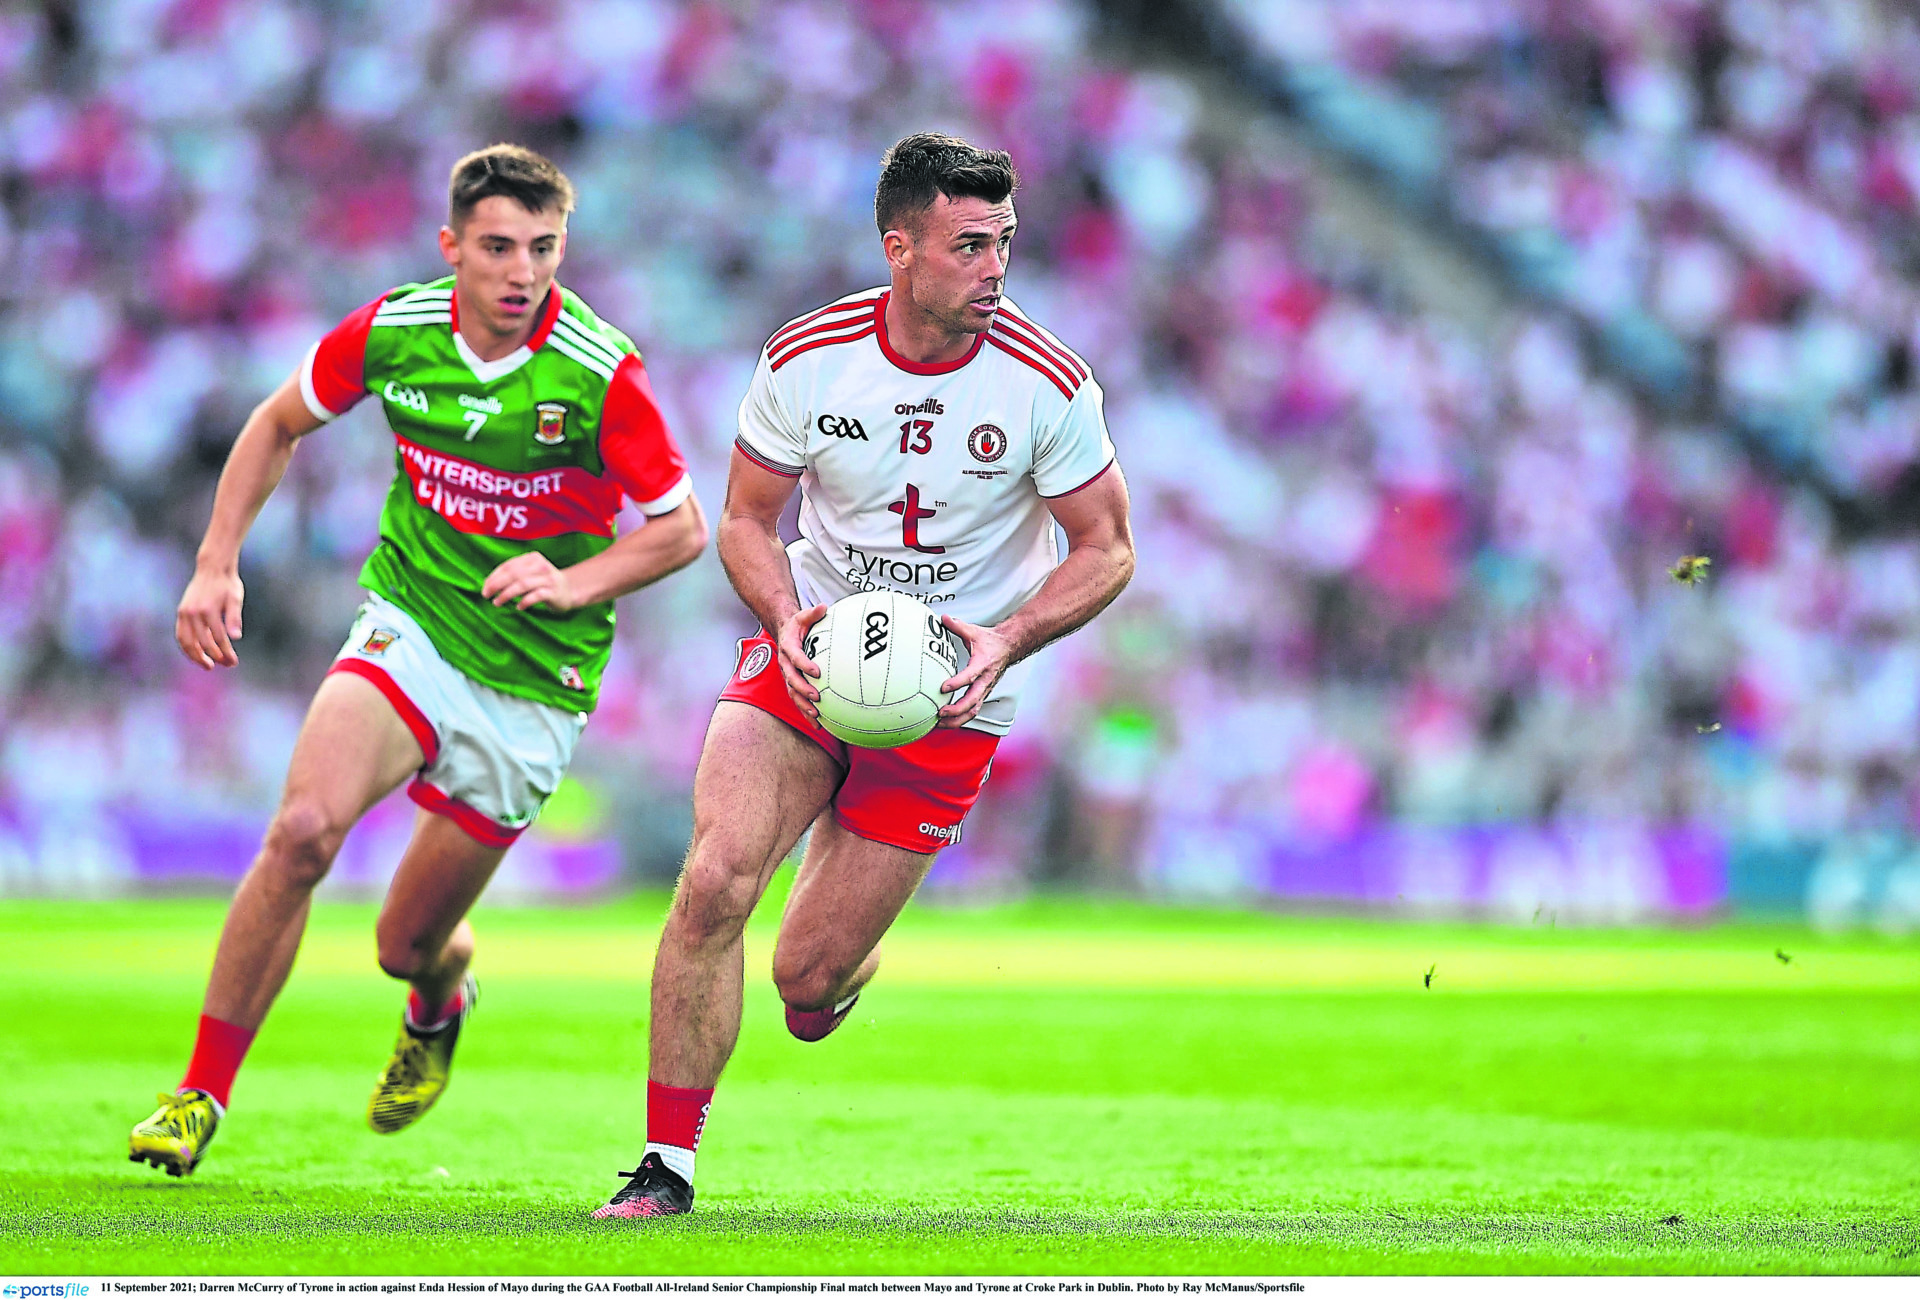 McCurry not surprised at Armagh’s revival